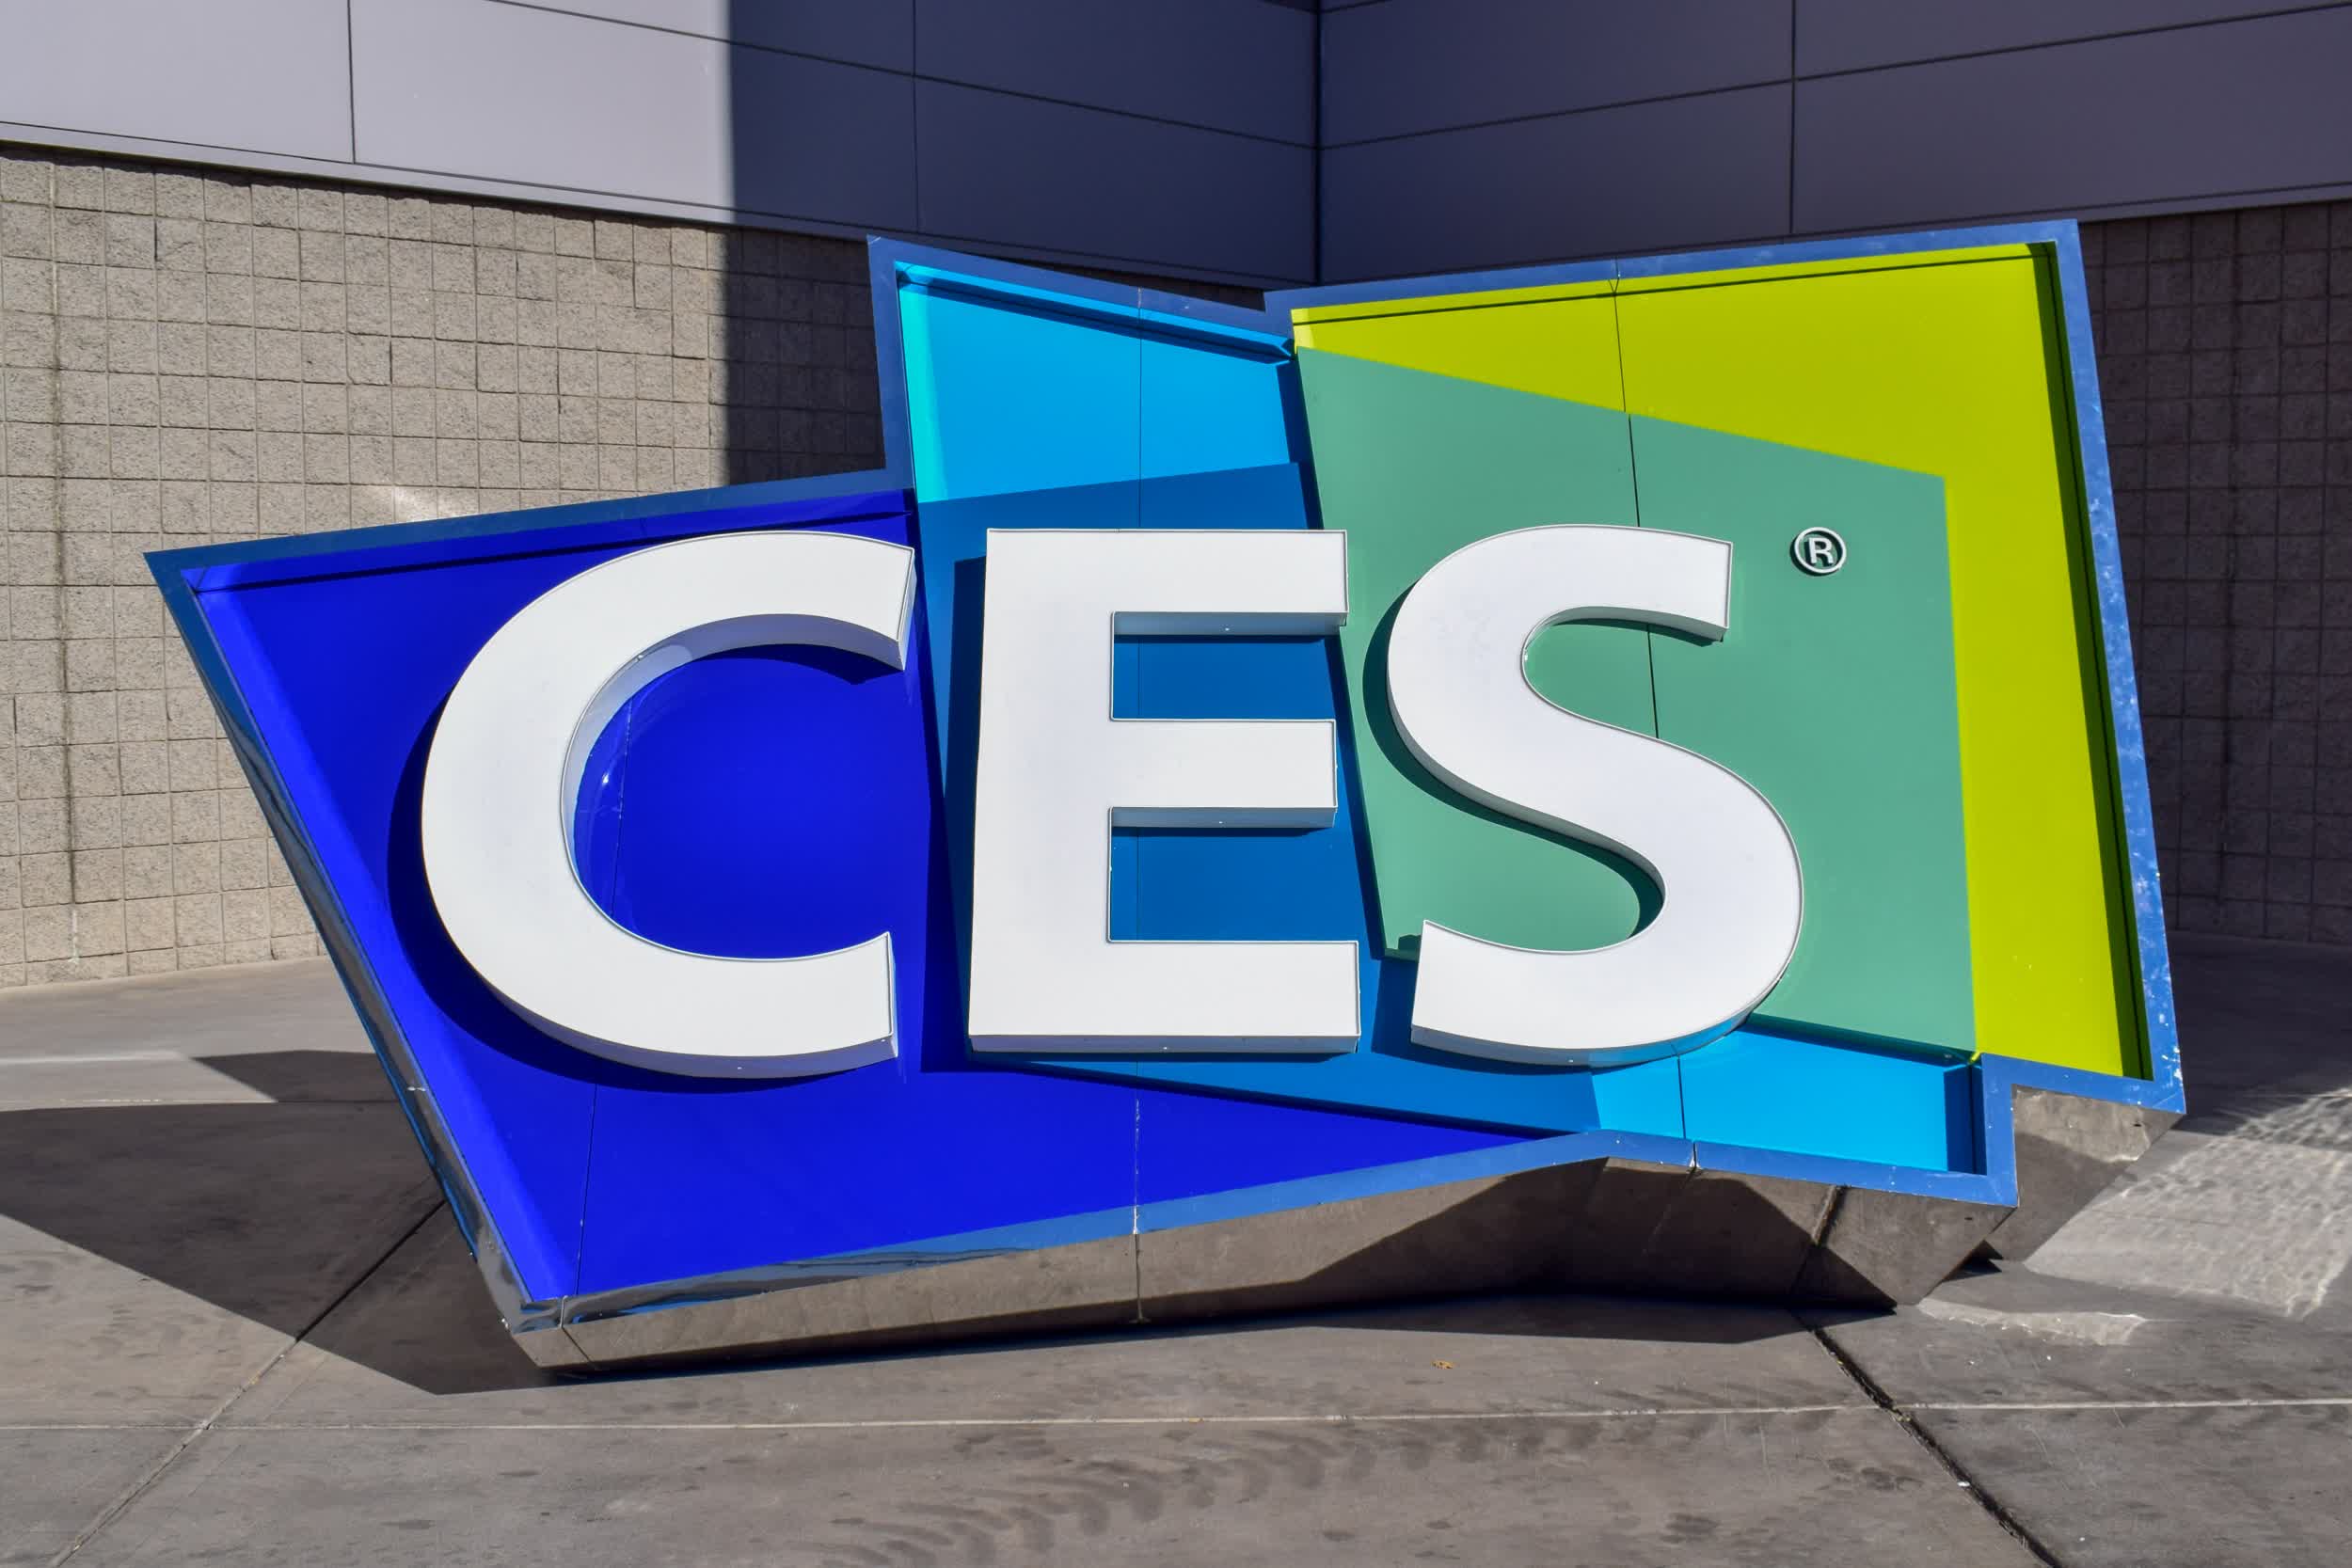 Opinion: What CES 2021 says about our future